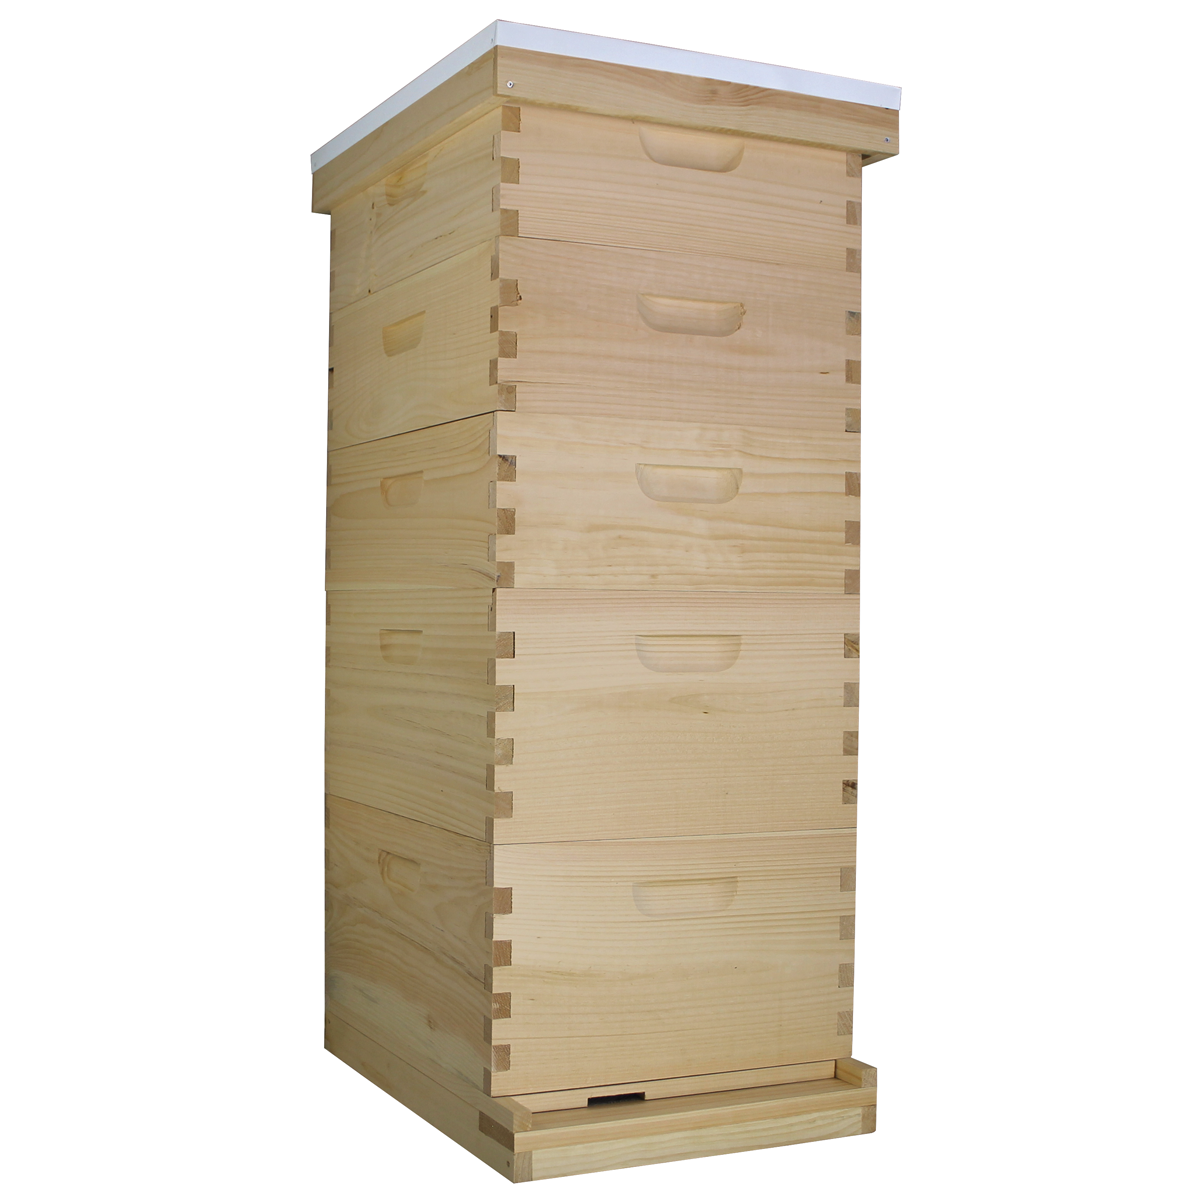 Busy Bees 'N' More Amish Made 10 Frame Beehive With 2 Deep Bee Boxes & 3 Medium Bee Boxes